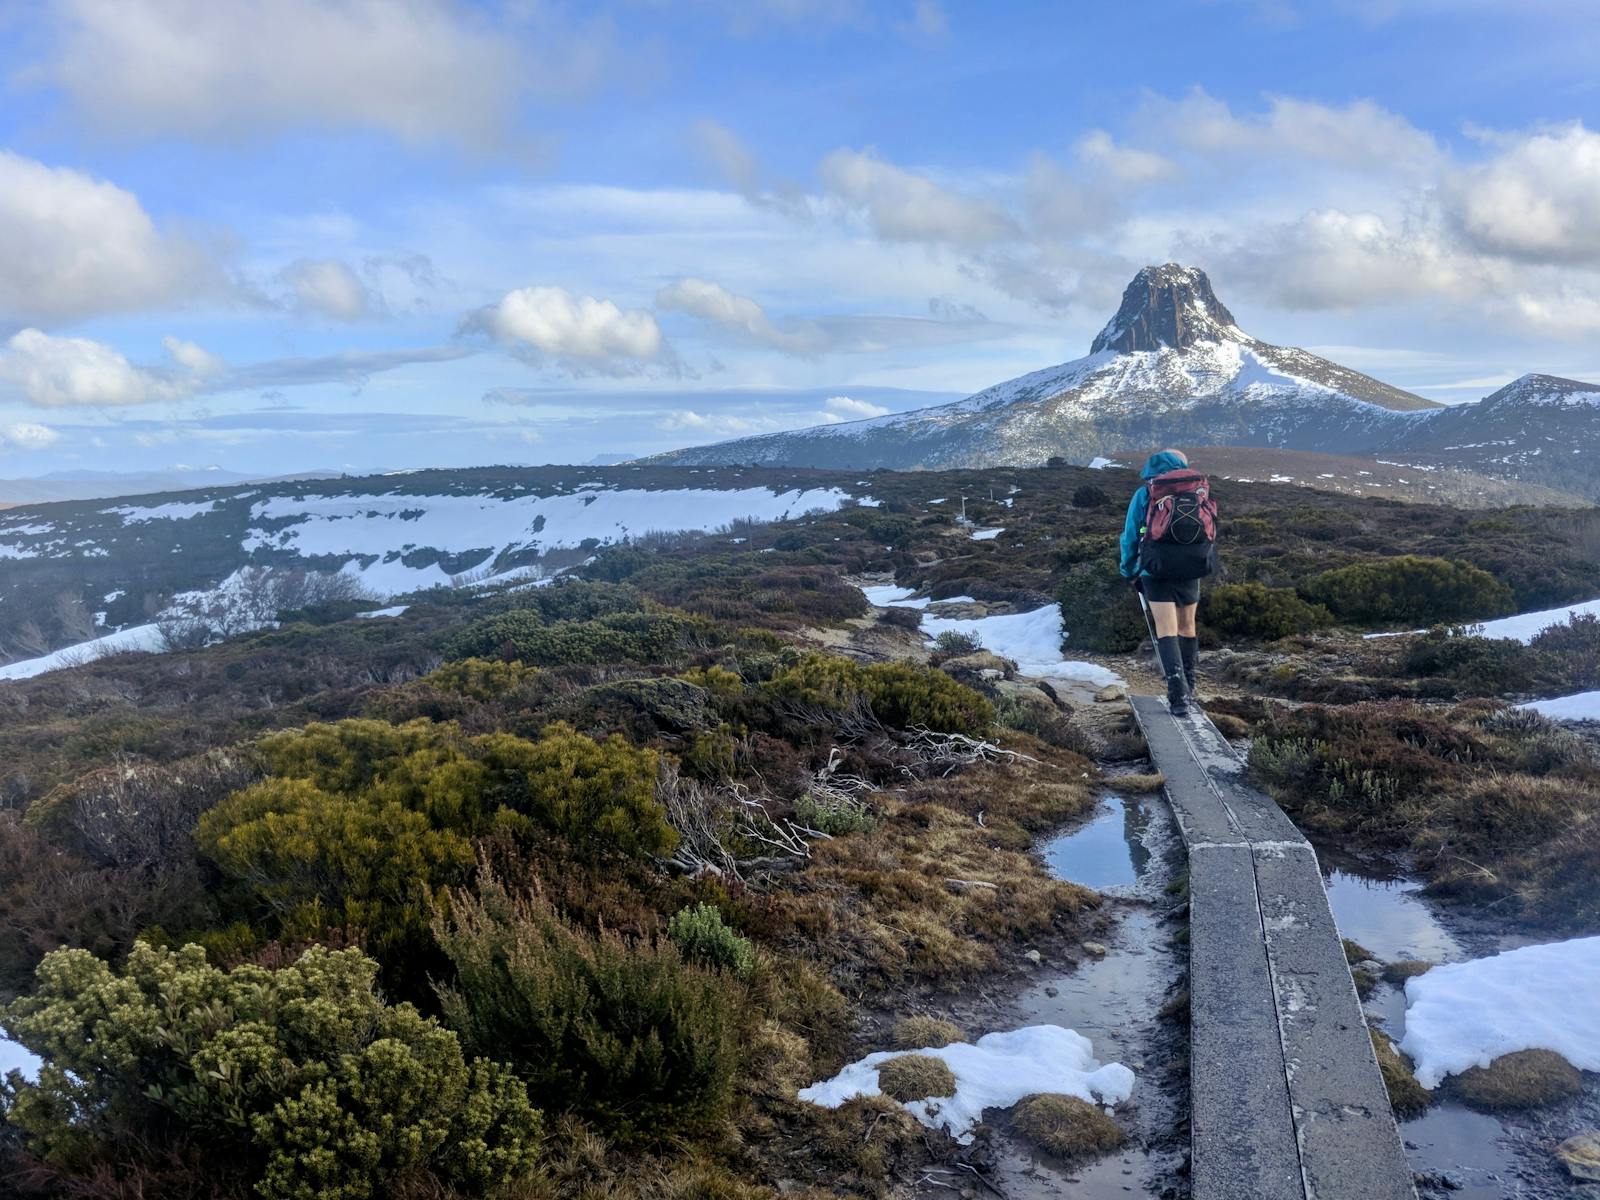 Winter on the Overland Track